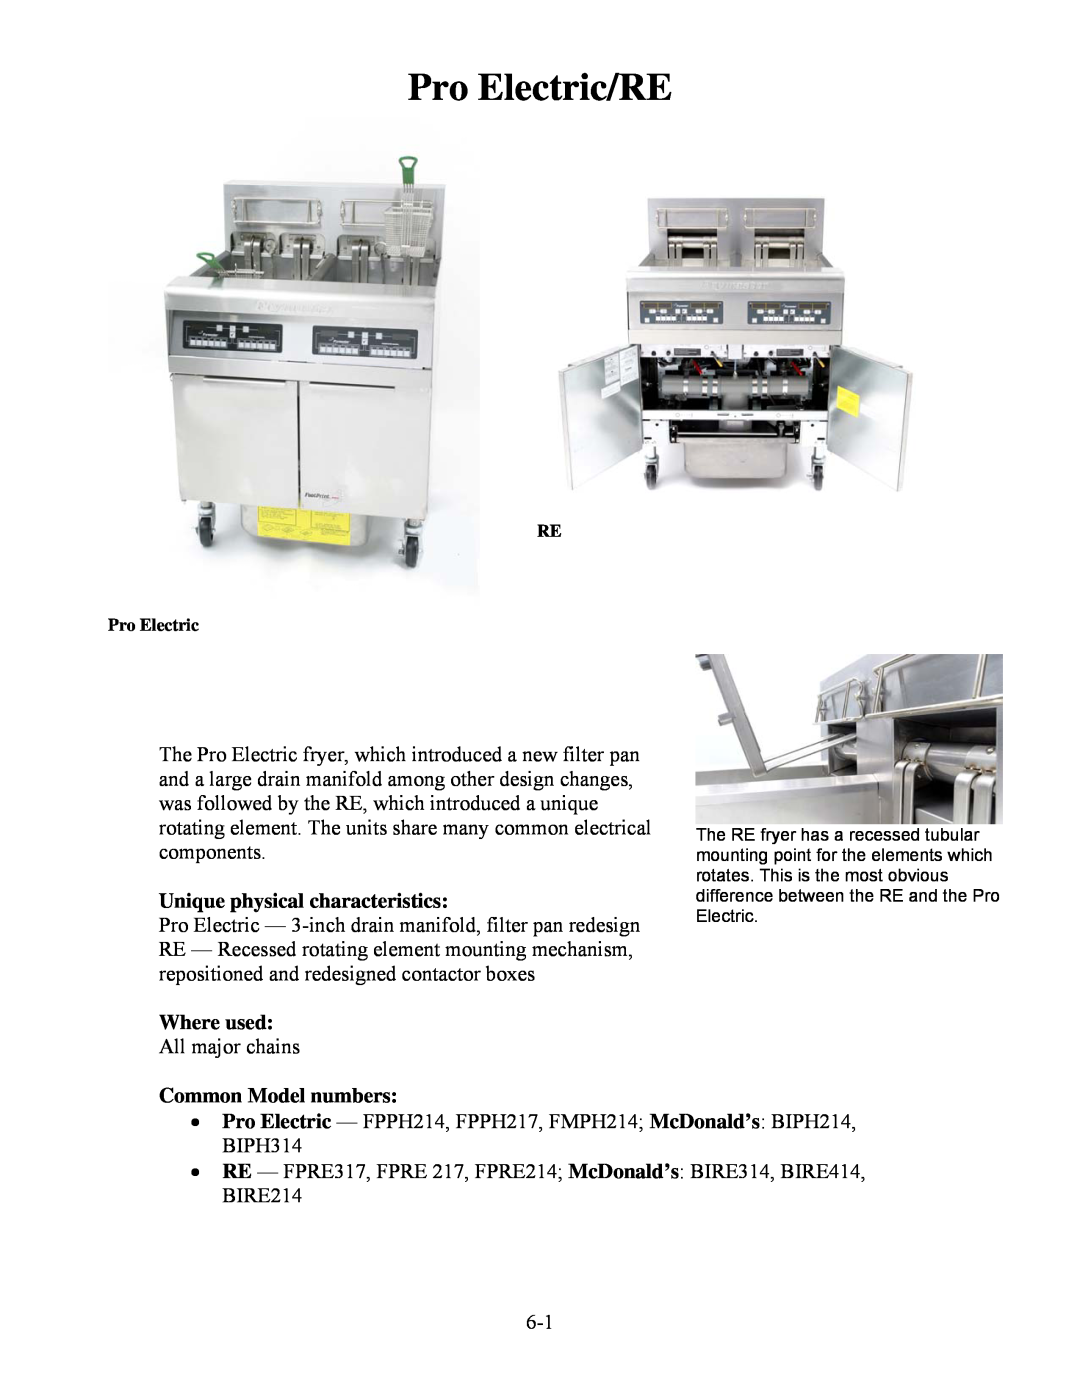 Frymaster H50 manual Pro Electric/RE, Unique physical characteristics, Where used, Common Model numbers 